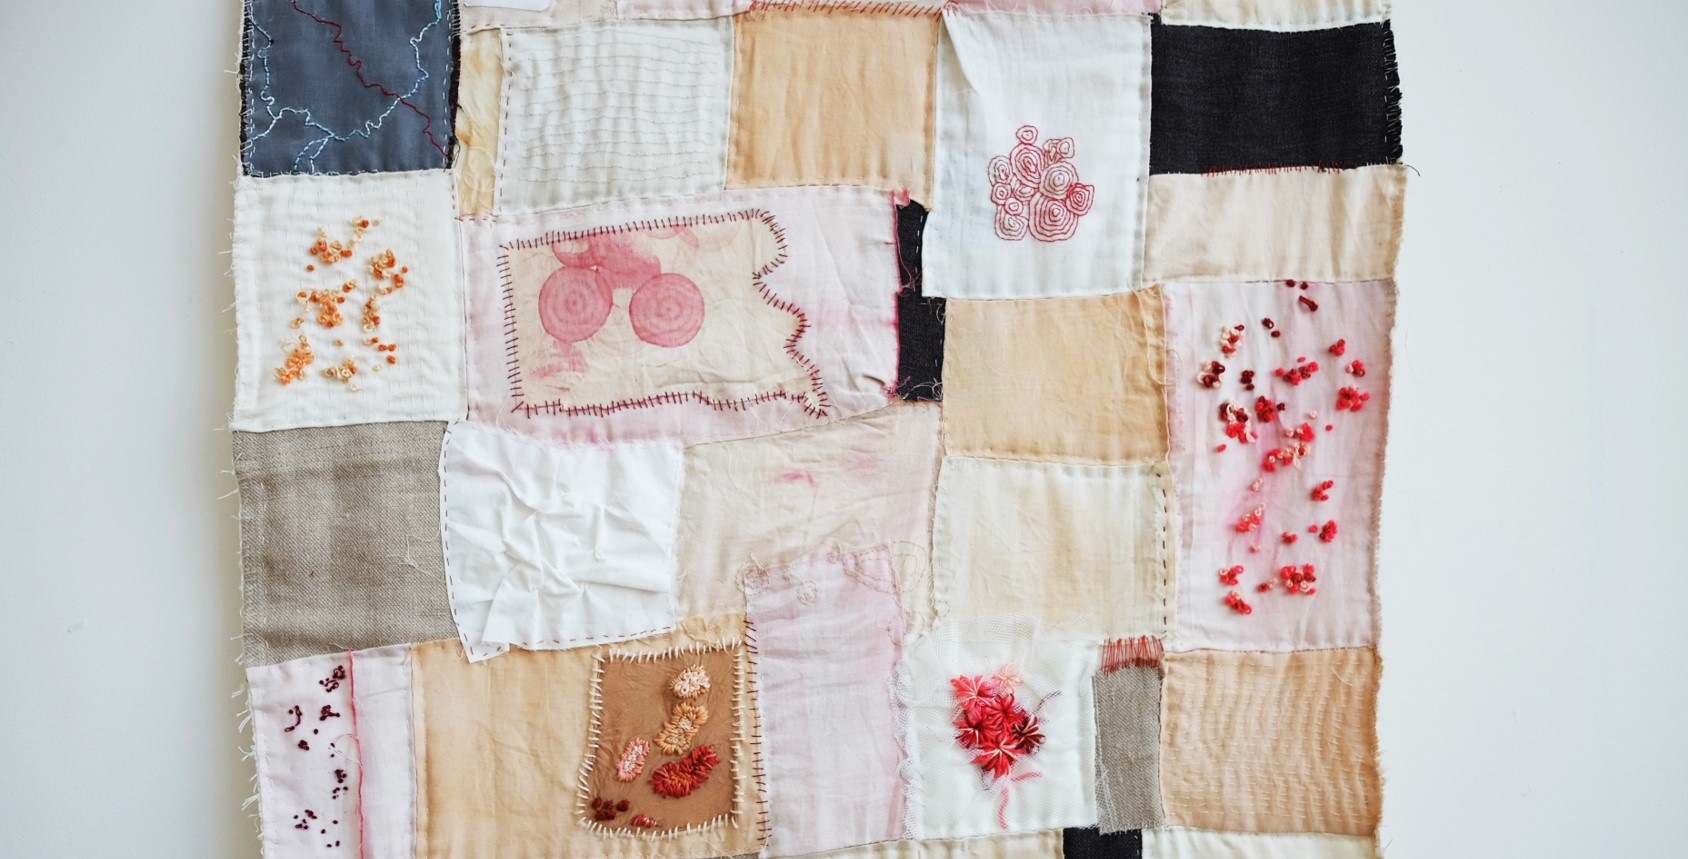 Middle section of patchwork quilt